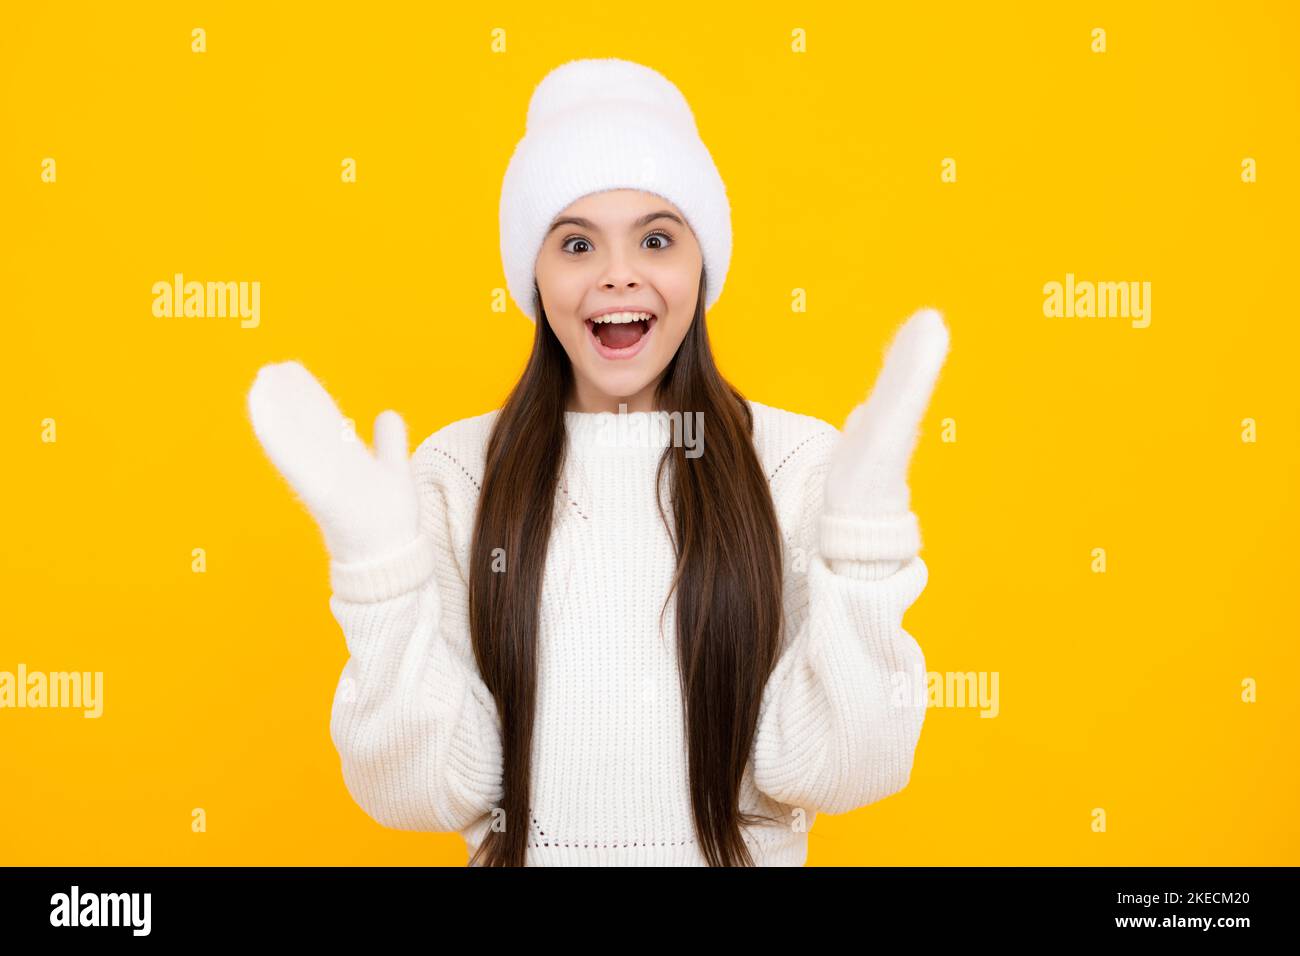 Child with positive expression, joyful and exciting, dressed in casual winter cloth over yellow background with empty space. Happy teenager girl Stock Photo